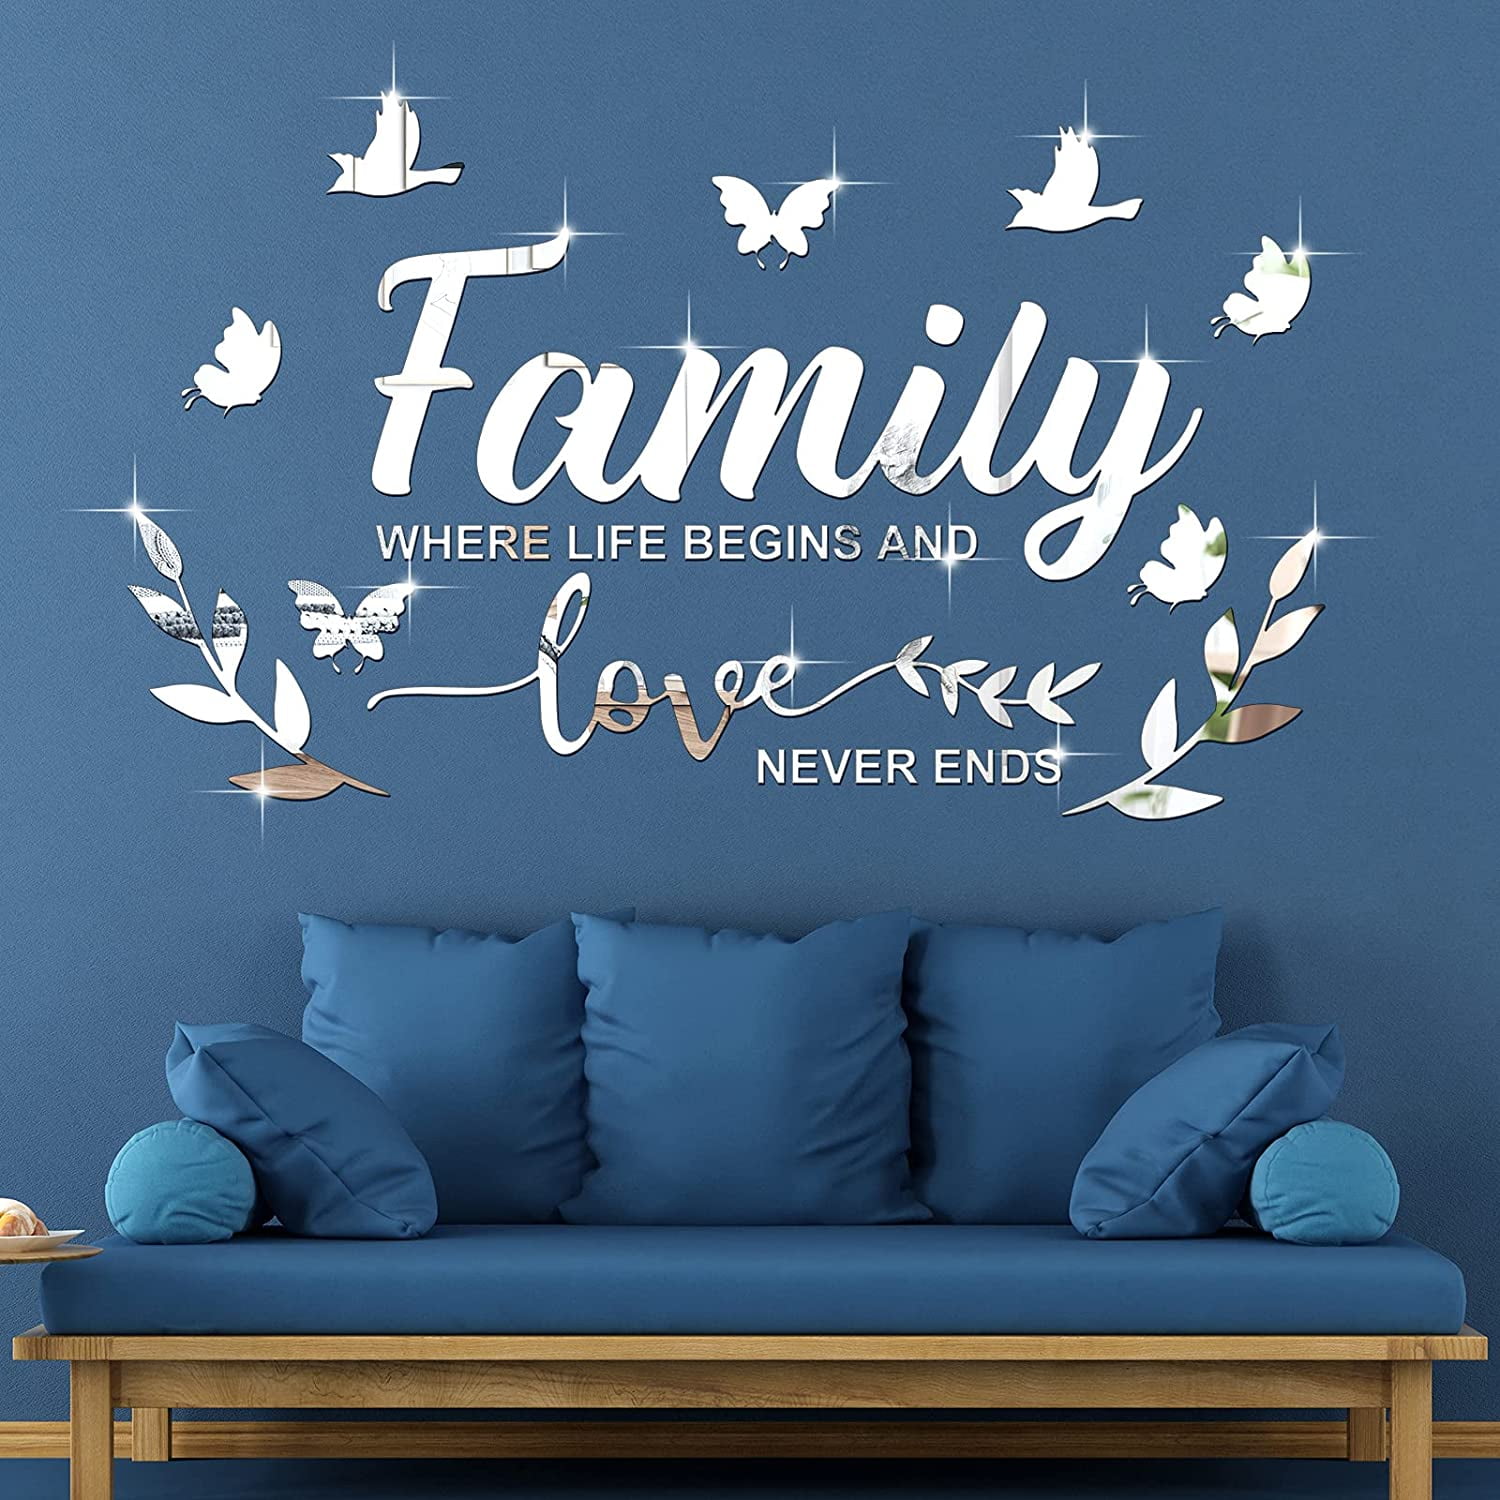 Motivational Quotes Decal Art Mural Wall Stickers Home Decor DIY Room 